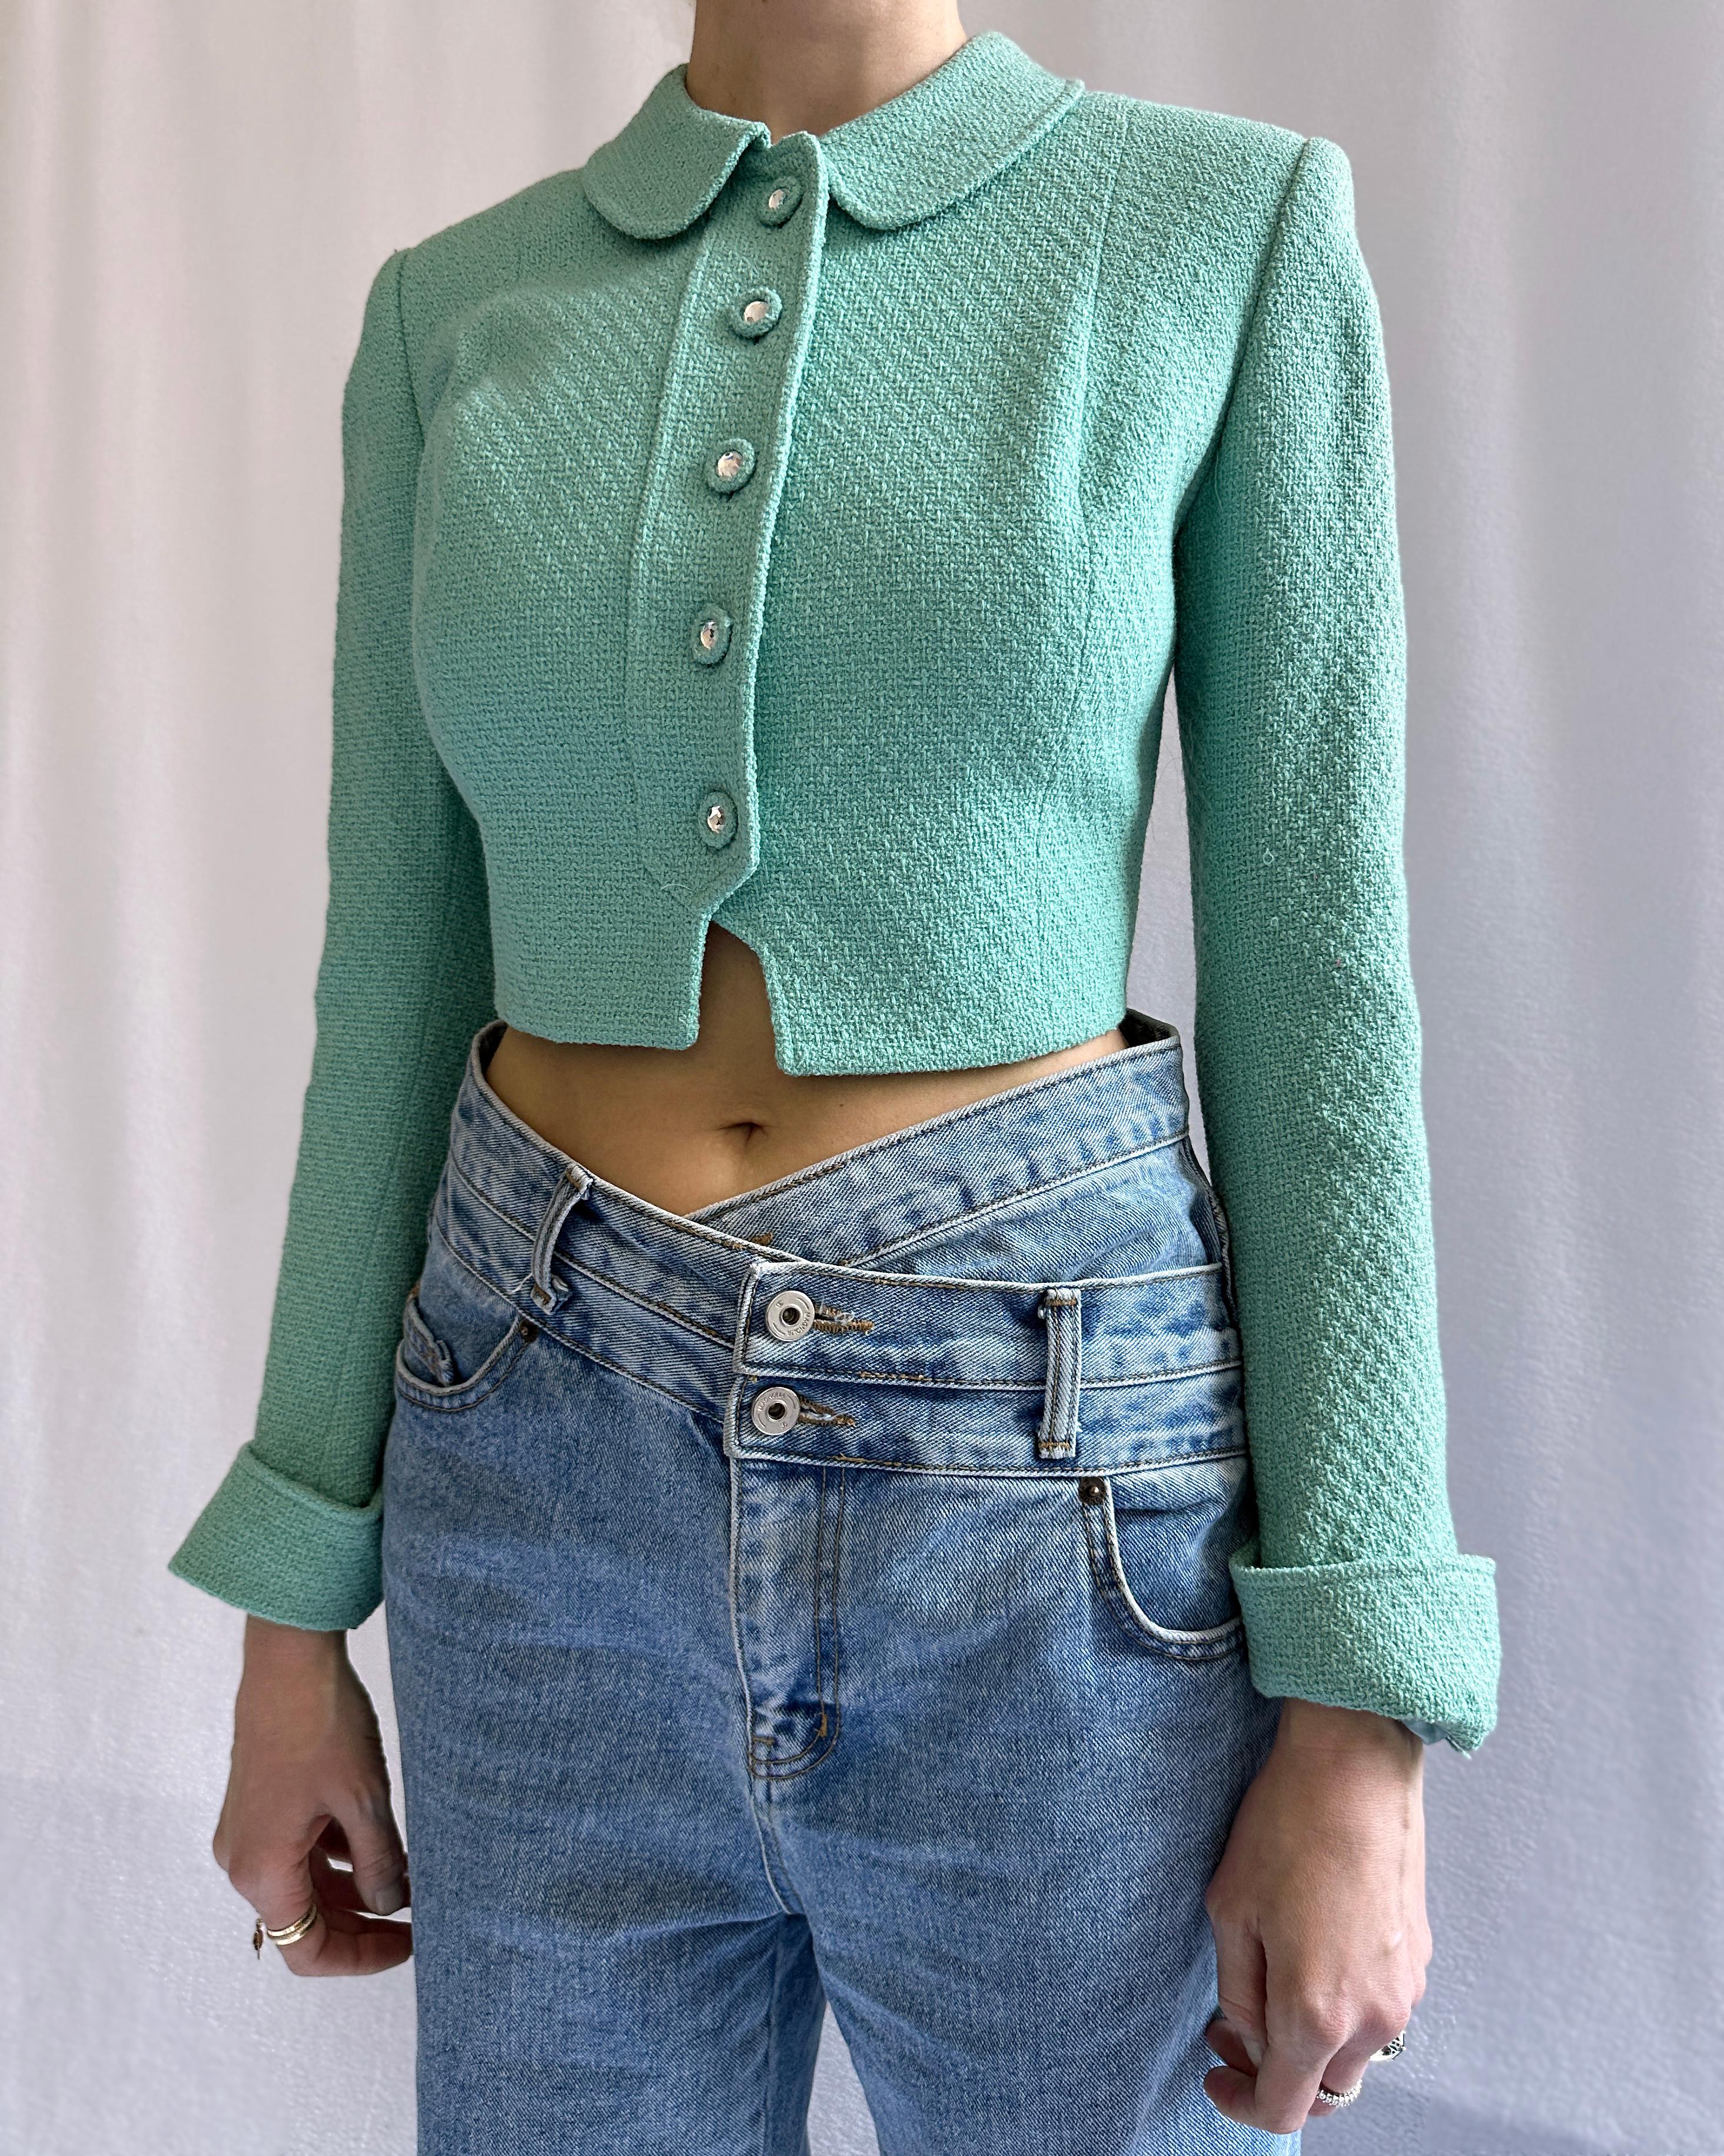 VERY BREEZY Presents: Vintage Y2K Blumarine is having a serious MOMENT and this Vintage Anna Molinari Blumarine bouclé jacket (circa late 90s) is such a chic way to get in on it. It's constructed of gorgeous mermaid-green wool bouclé, with sharp